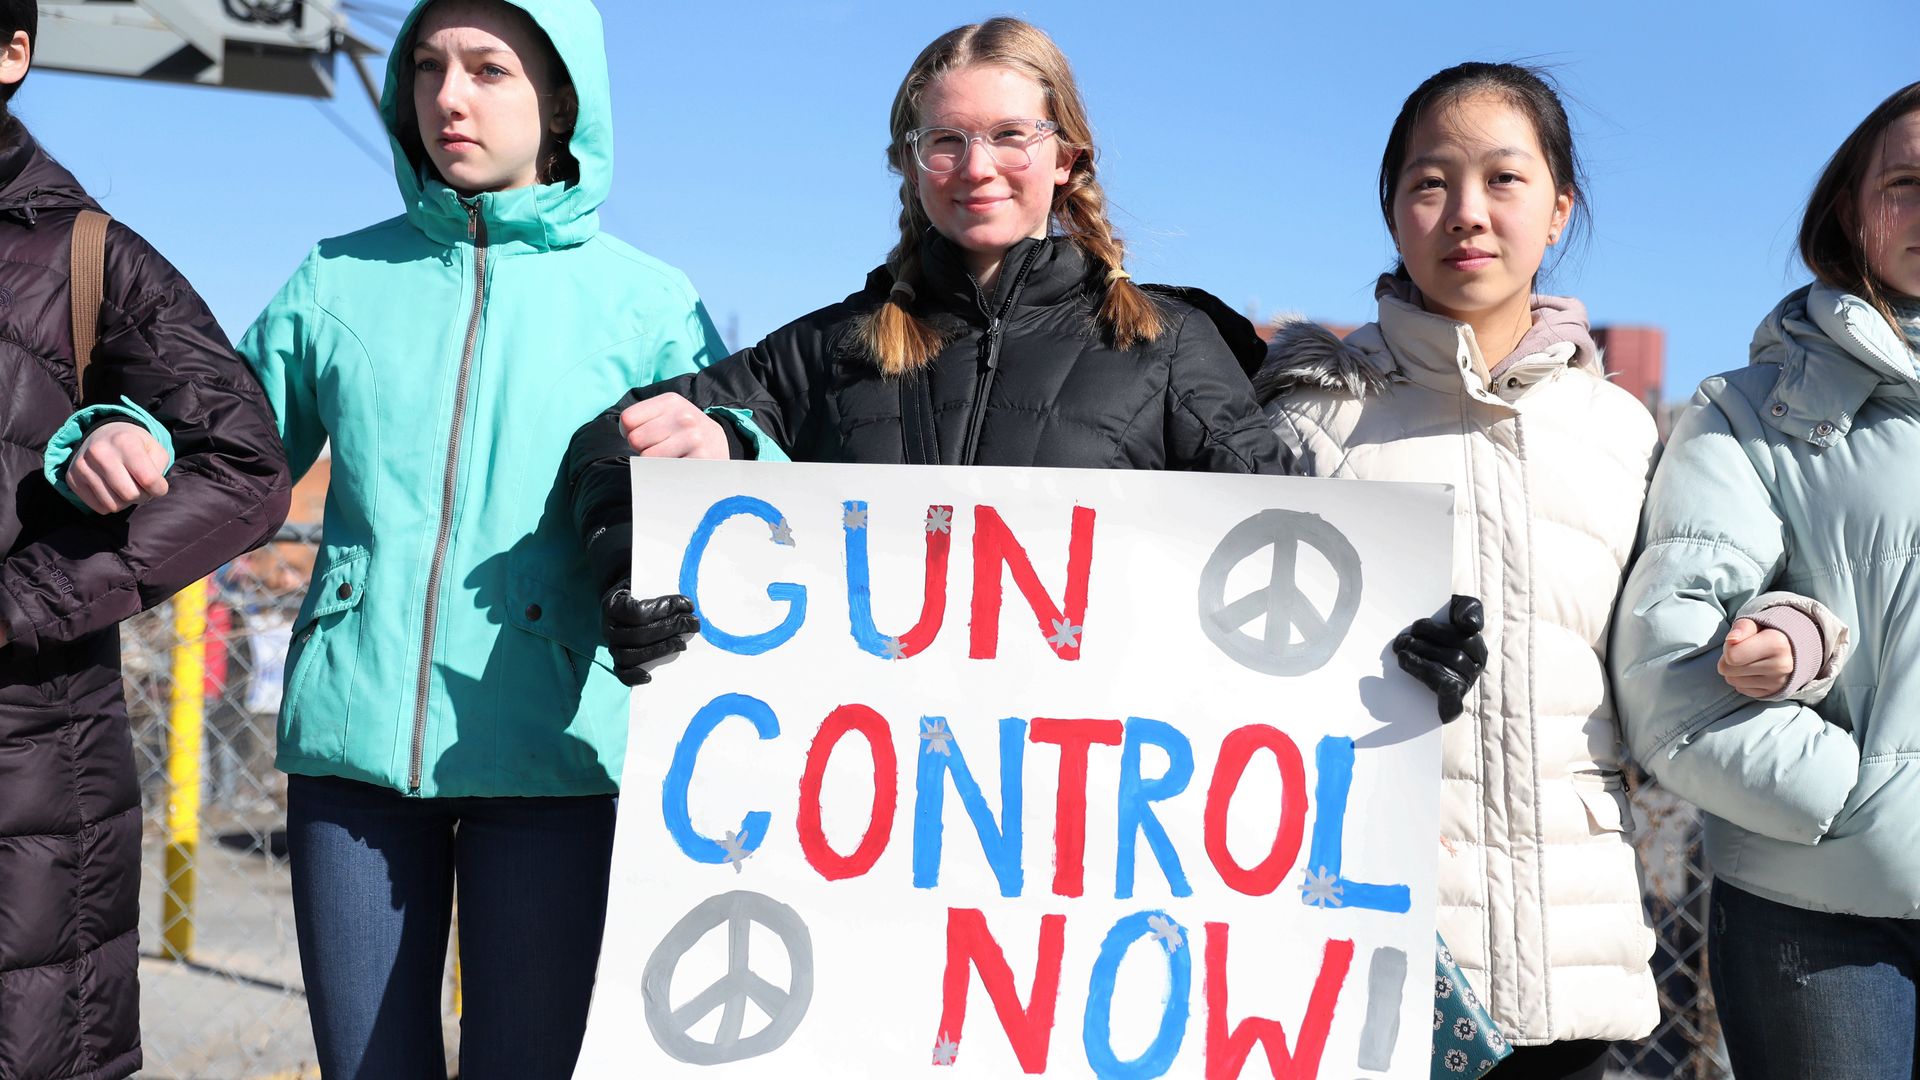 girls hold sign that says "gun control now!"